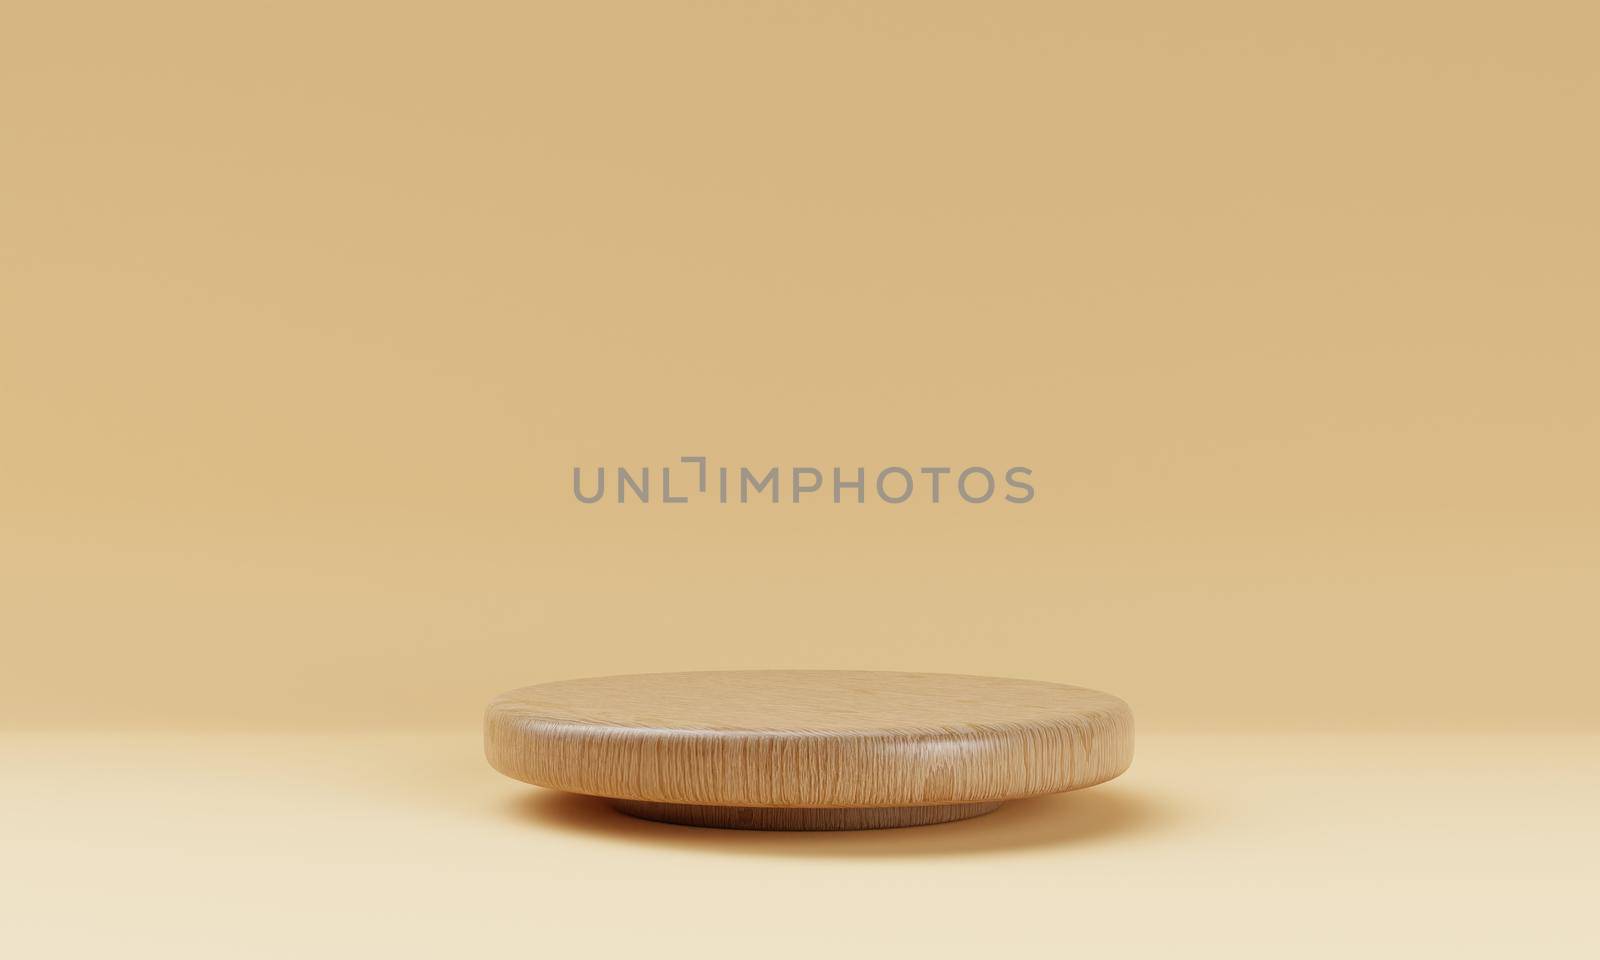 One brown wooden round cylinder product stage podium on orange background. Minimal fashion theme. Geometry exhibition stage mockup concept. 3D illustration rendering by MiniStocker